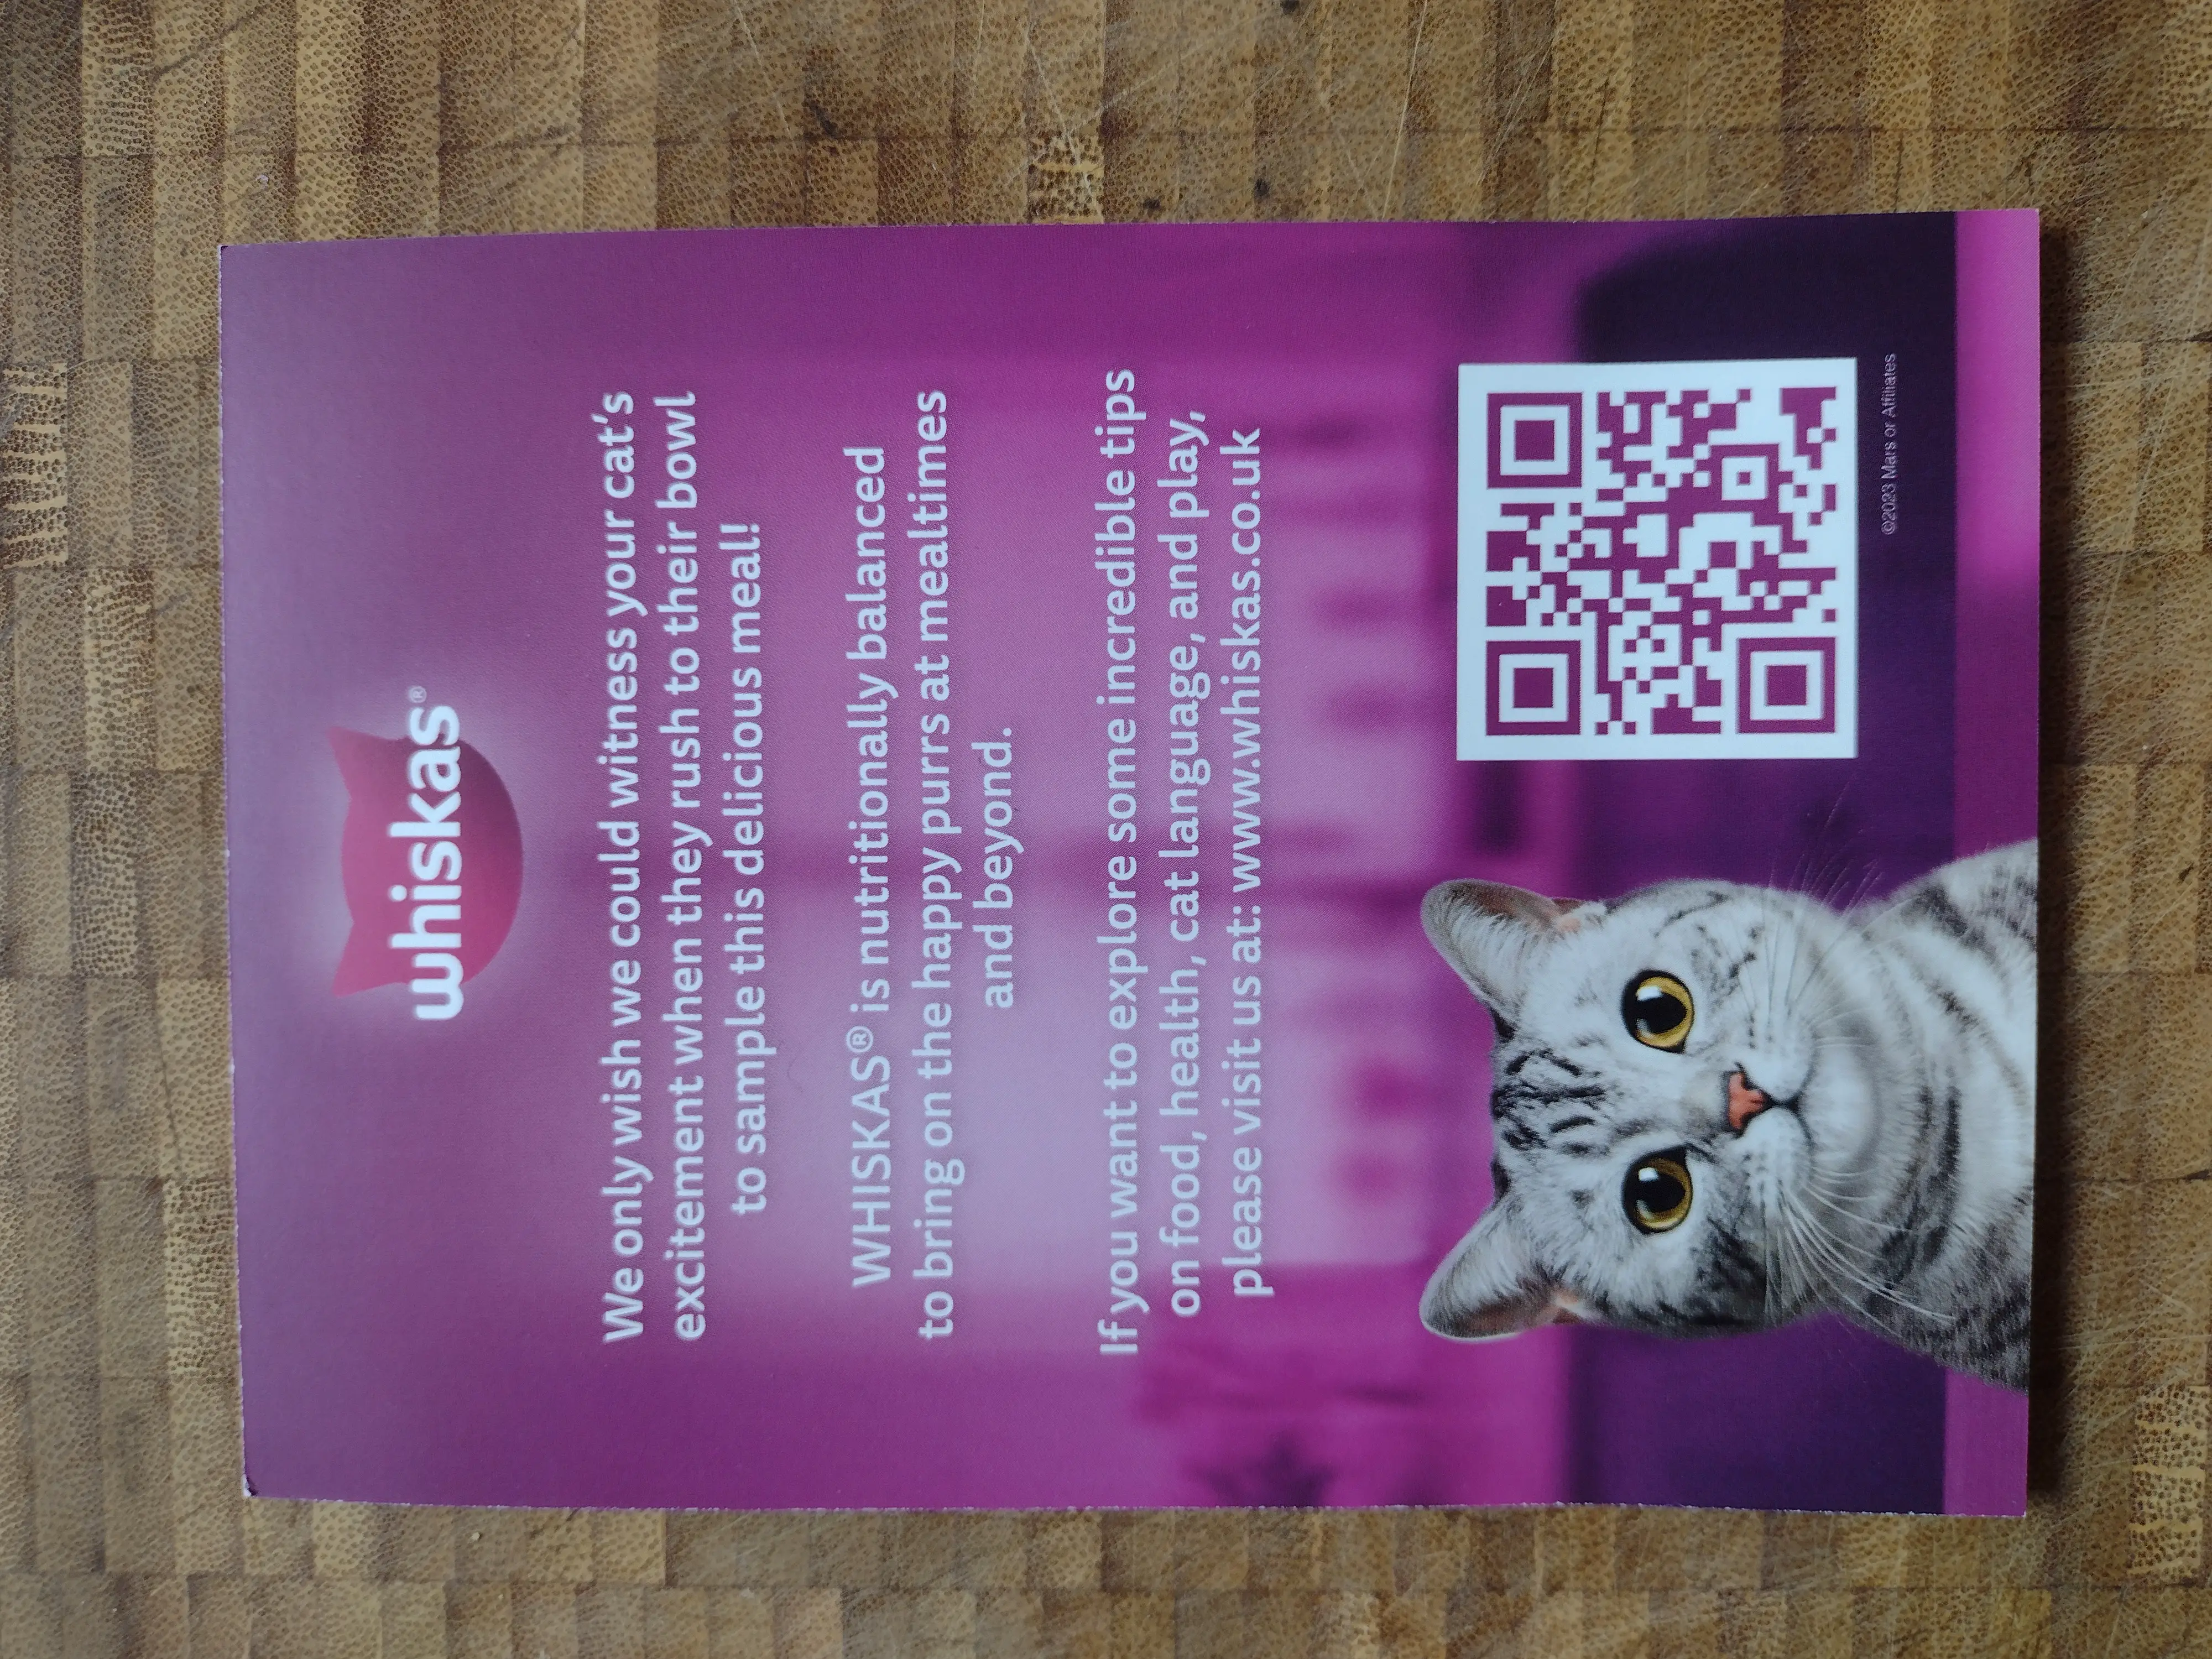 qr code Receiving & Reviewing my FREE Sample of Whiskas Cat Food save money deal offer discount promotion review flavour pouch sachet jelly post mail delivery freebies packaging cardboard box flyer hashtag size wet brand website